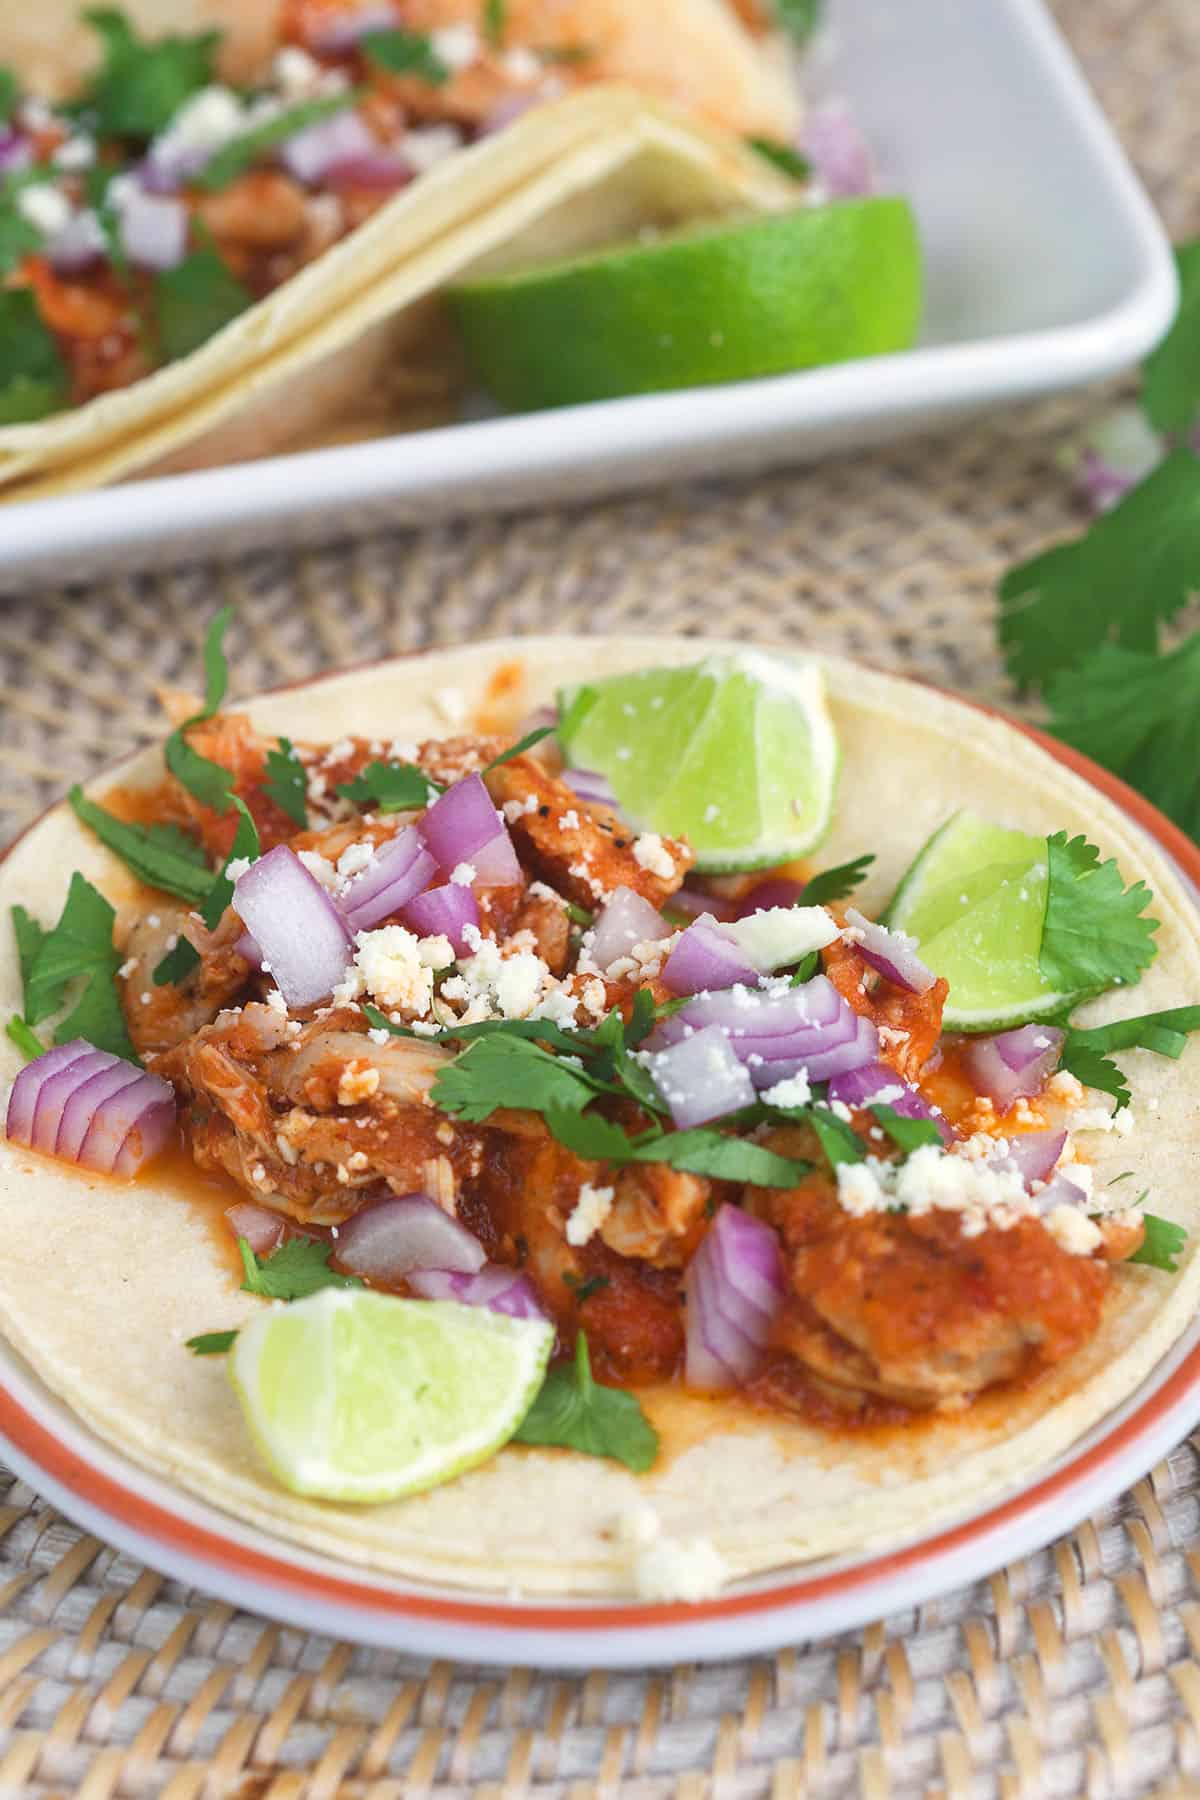 A chicken tinga taco is presented with lime wedges.